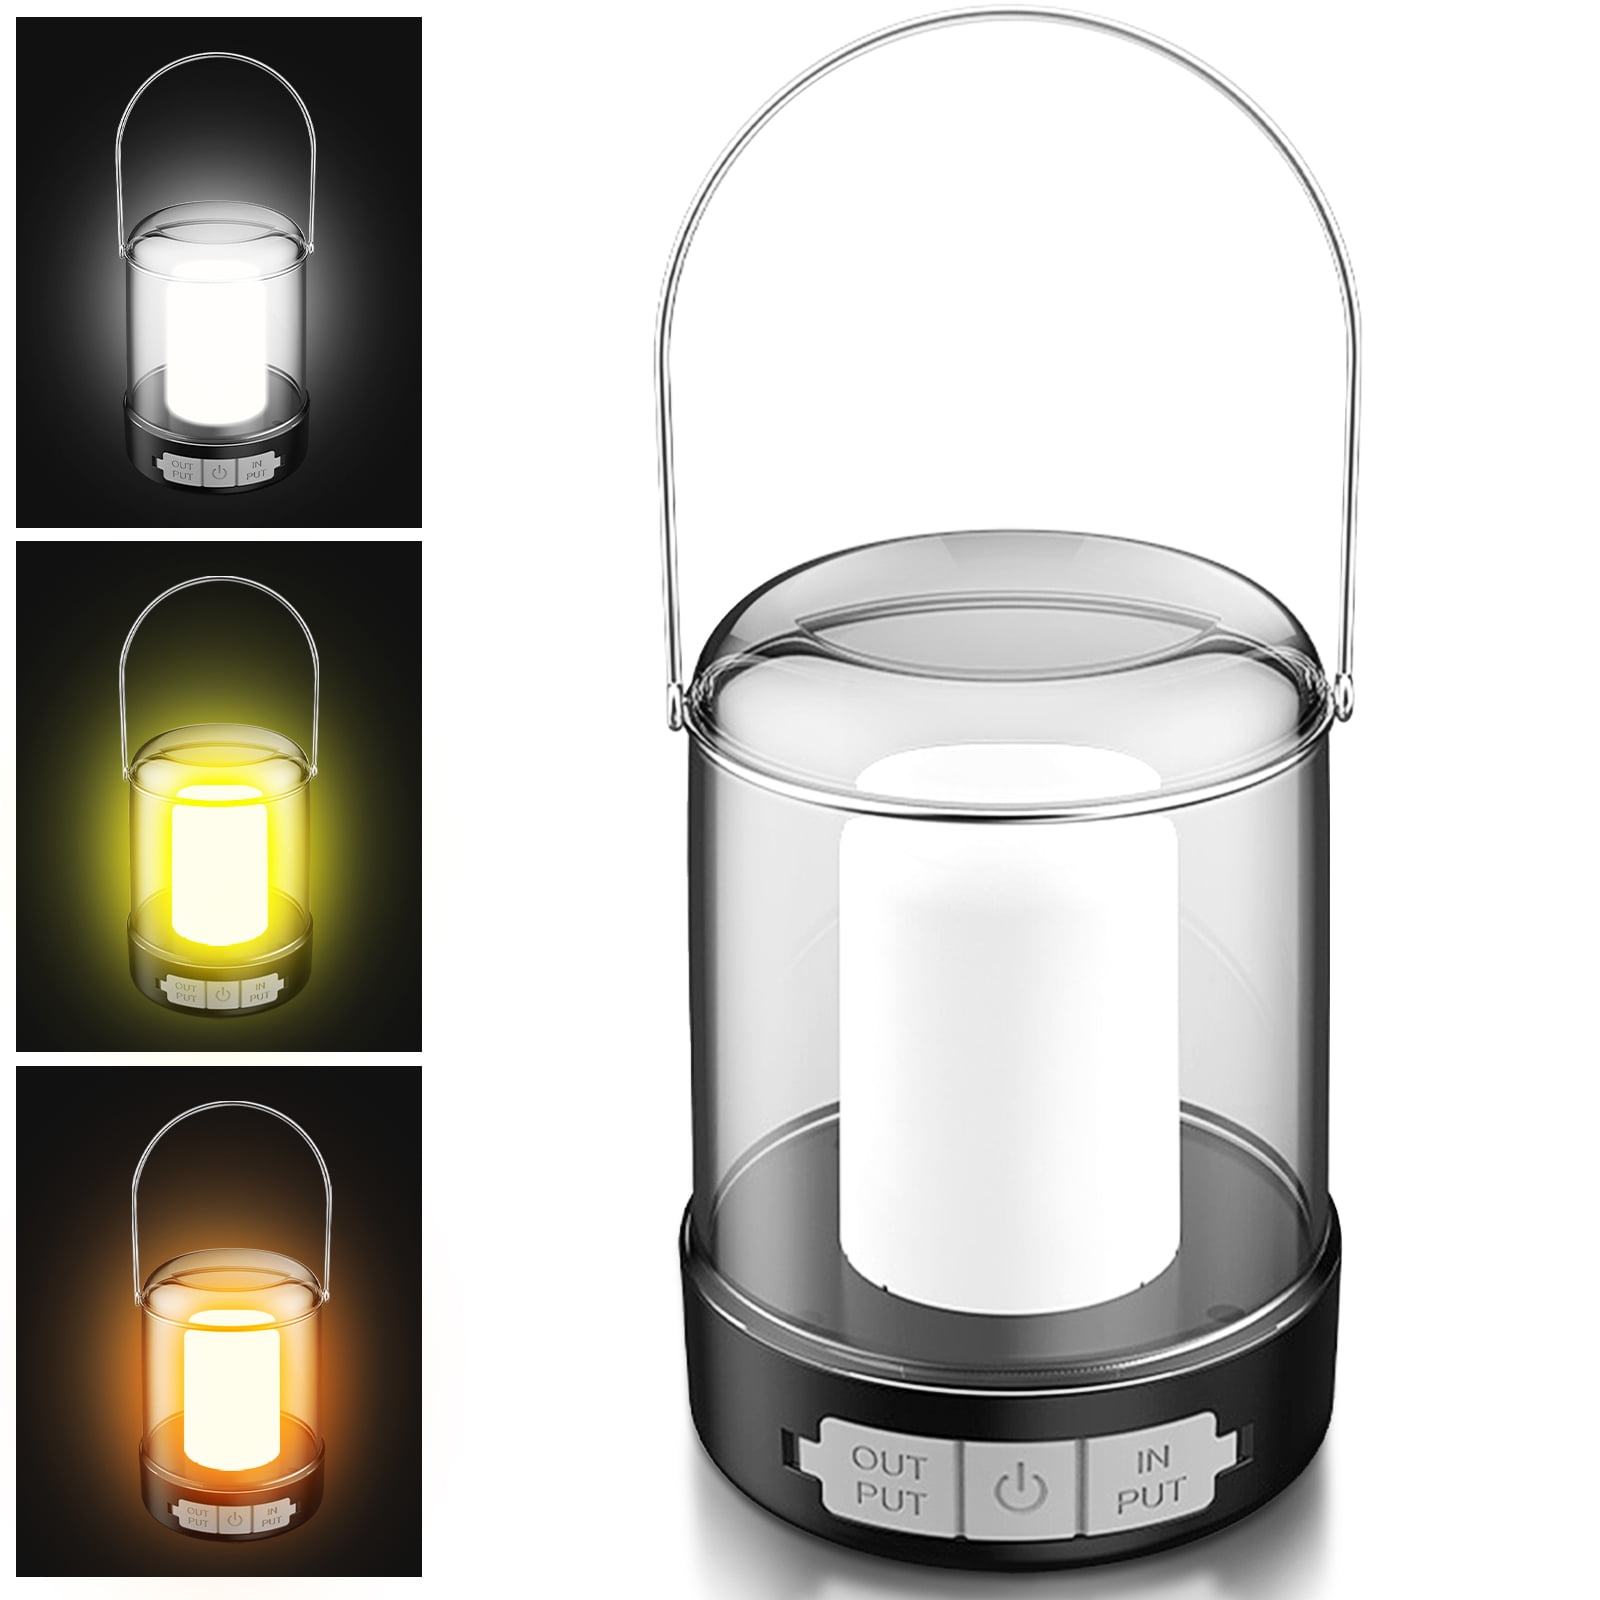 Eccomum LED Camping Lantern, Ultra Bright Battery Powered Lanterns with 200lm, 3 Light Modes, Waterproof Tent Light for Camping, Outdoors, Emergency